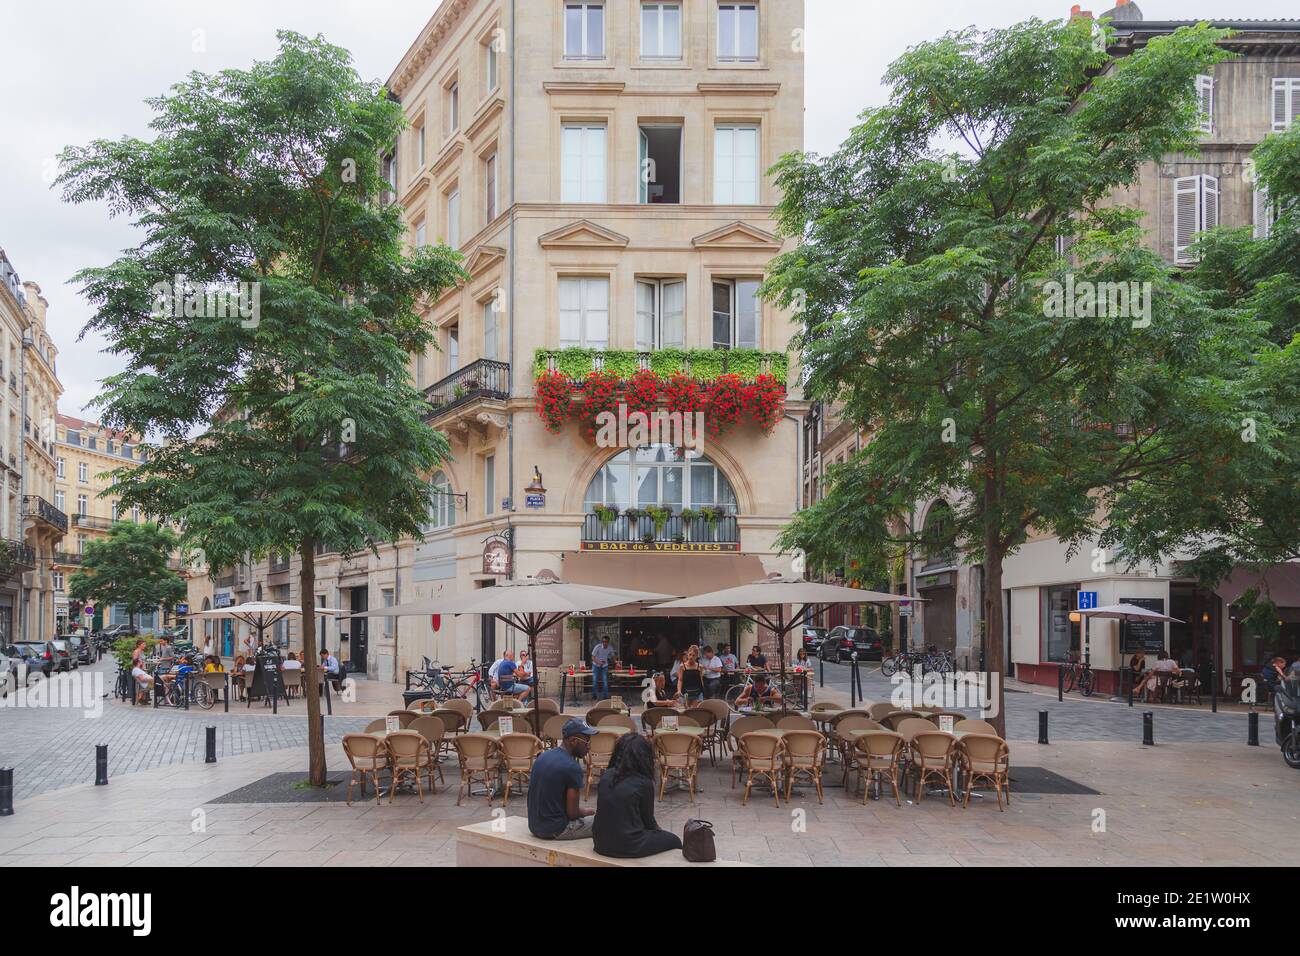 Bordeaux, France - July 22 2016: Outdoor summer scene at Place du Palais, a popular spot with tourists and locals to enjoy cafes in Bordeaux, France Stock Photo